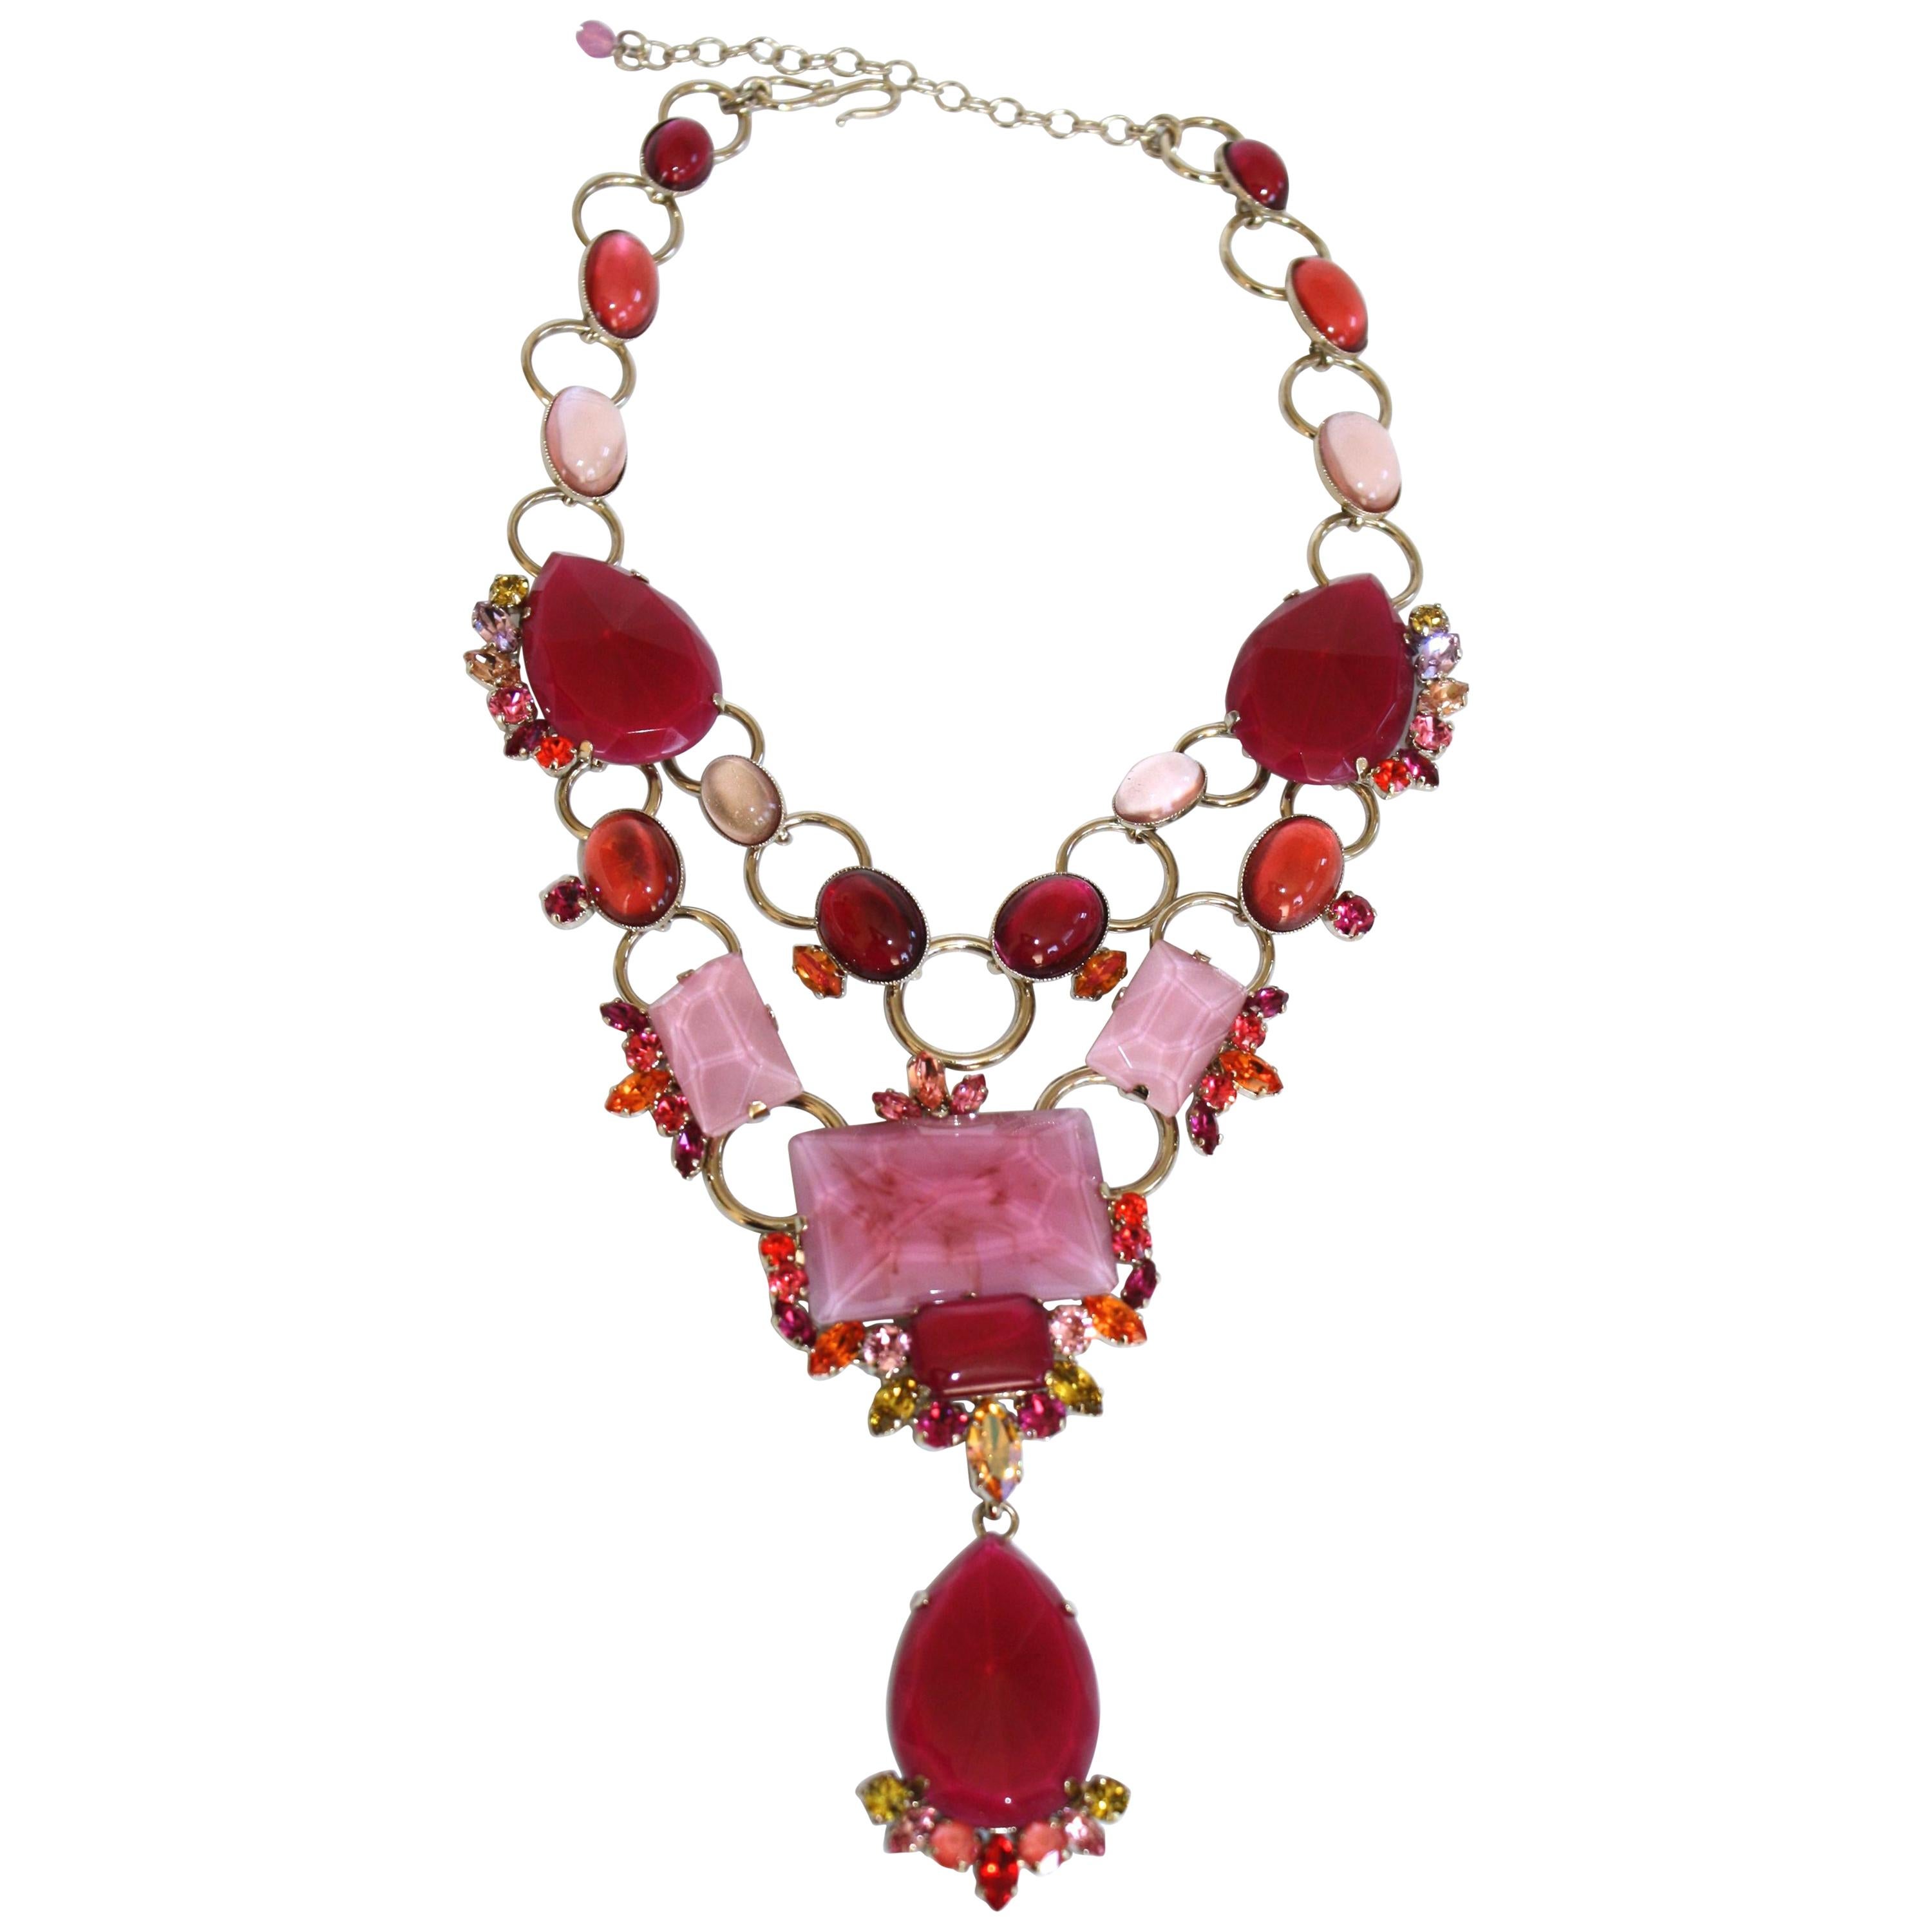 Philippe Ferrandis Pink and Fuchsia Statement Necklace